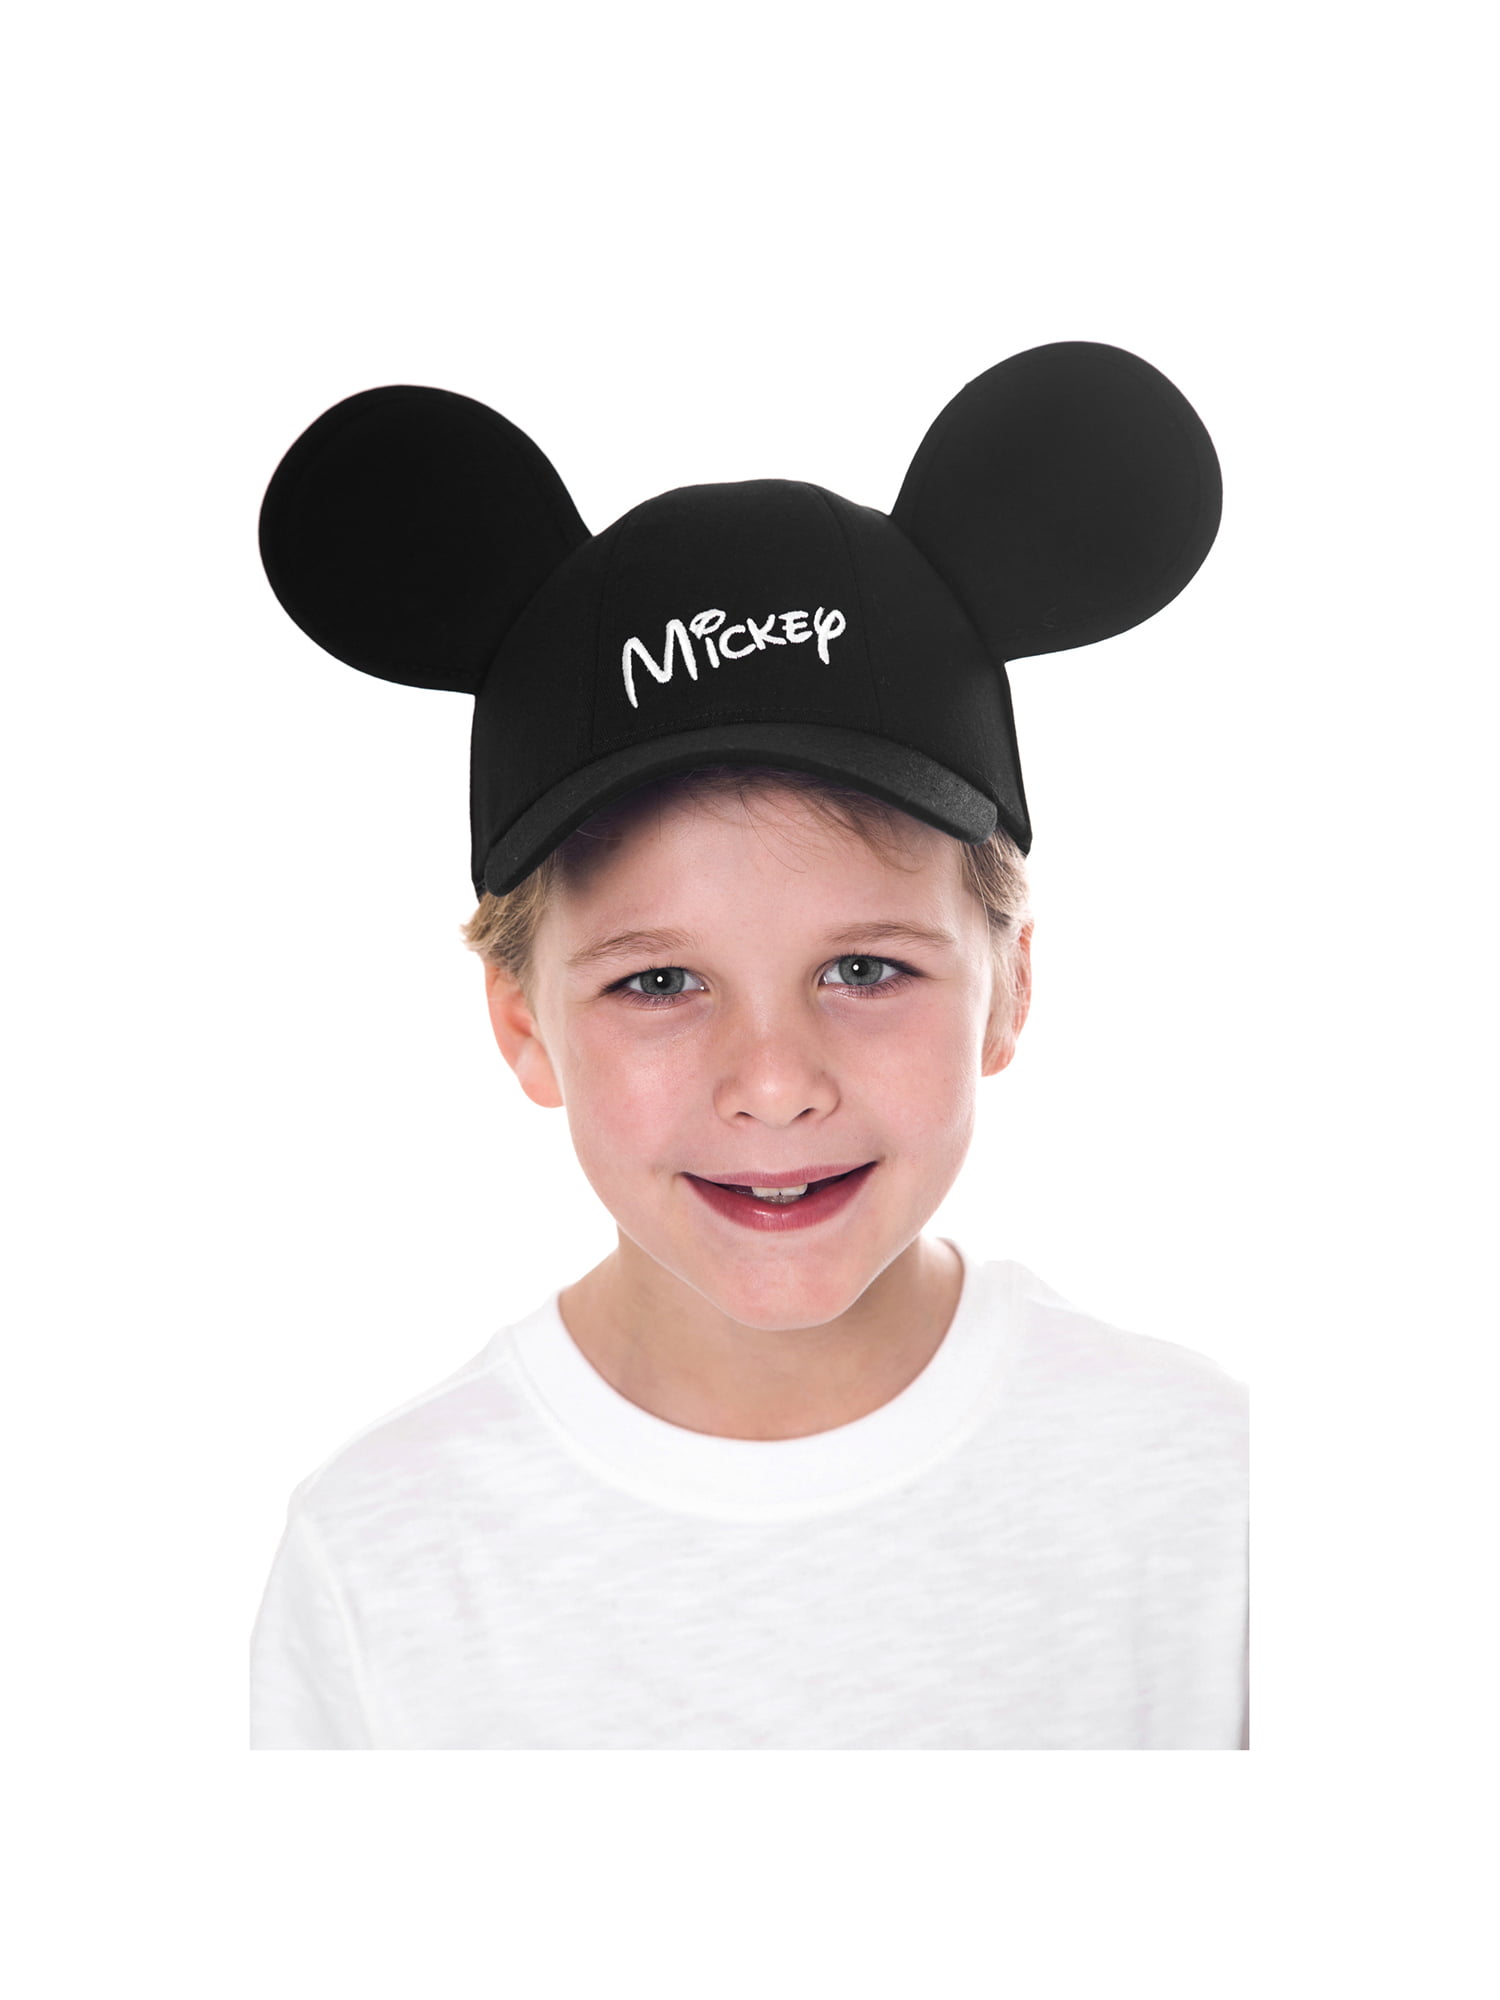 Black Adult Mickey Mouse Hat Baseball Cap with Ears